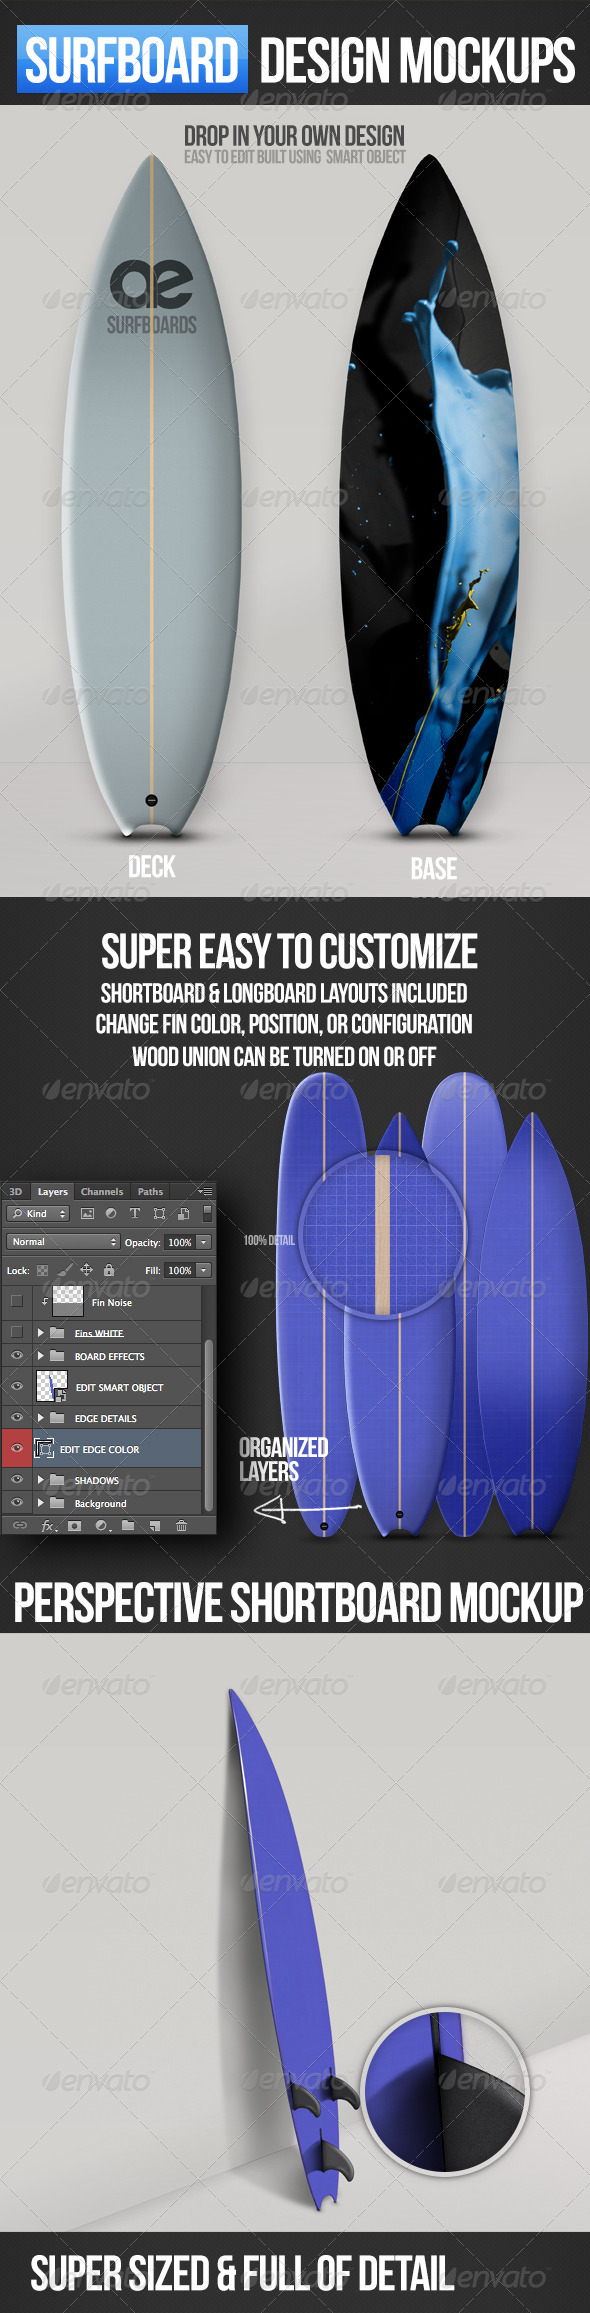 Download Free Psd Surfboard Mockup » Tinkytyler.org - Stock Photos ...